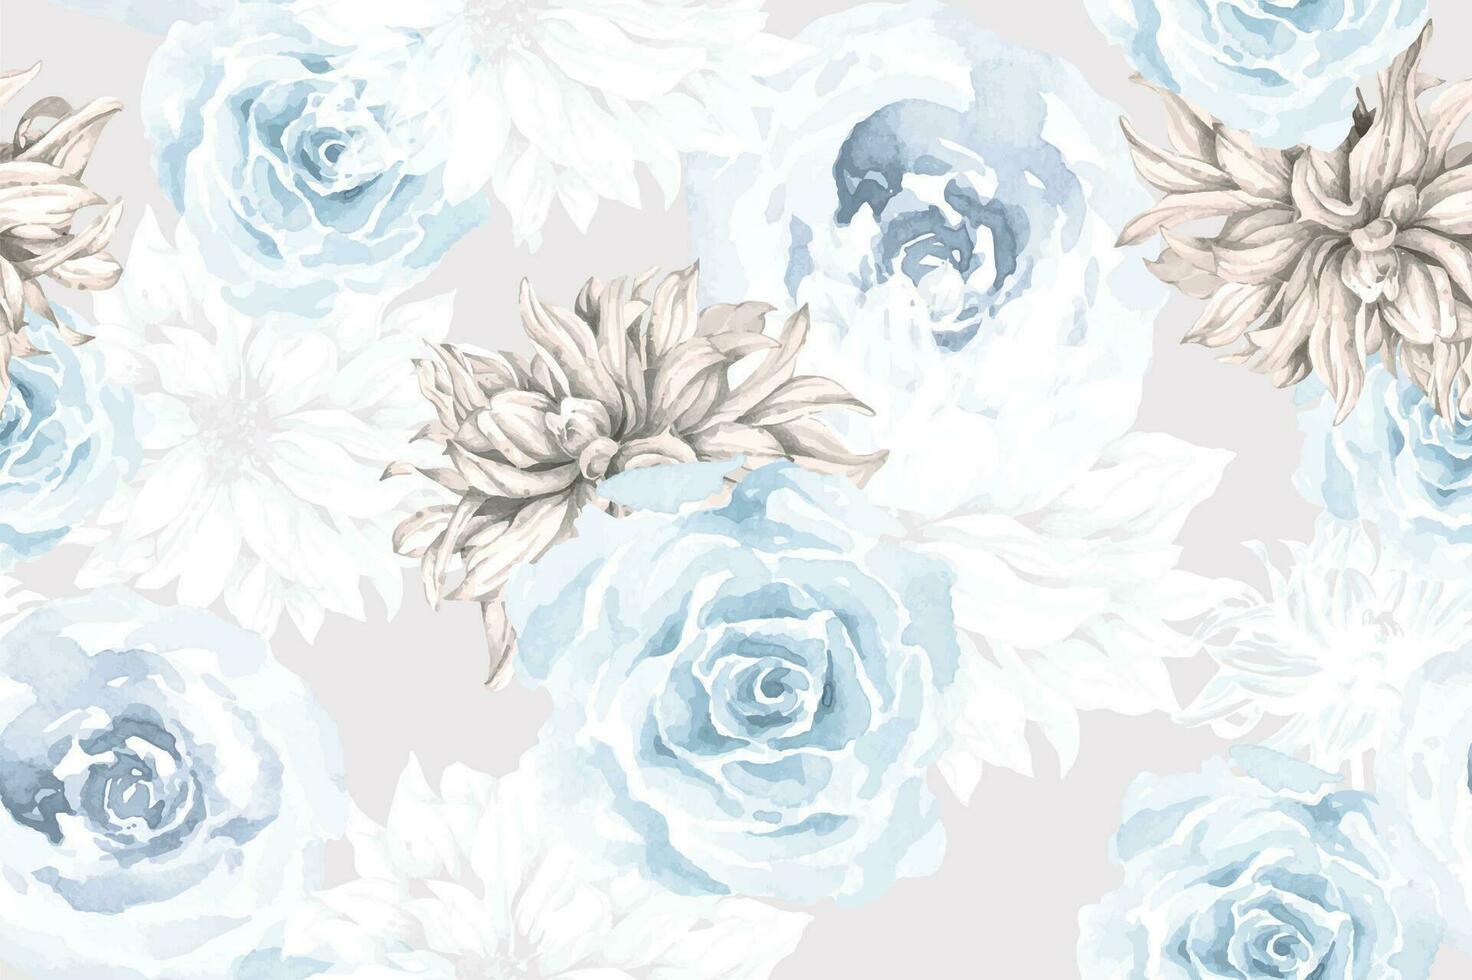 Flower seamless pattern with watercolor.Designed for fabric and wallpaper, vintage style.Blooming floral painting for summer.Botany flower pastel background vector